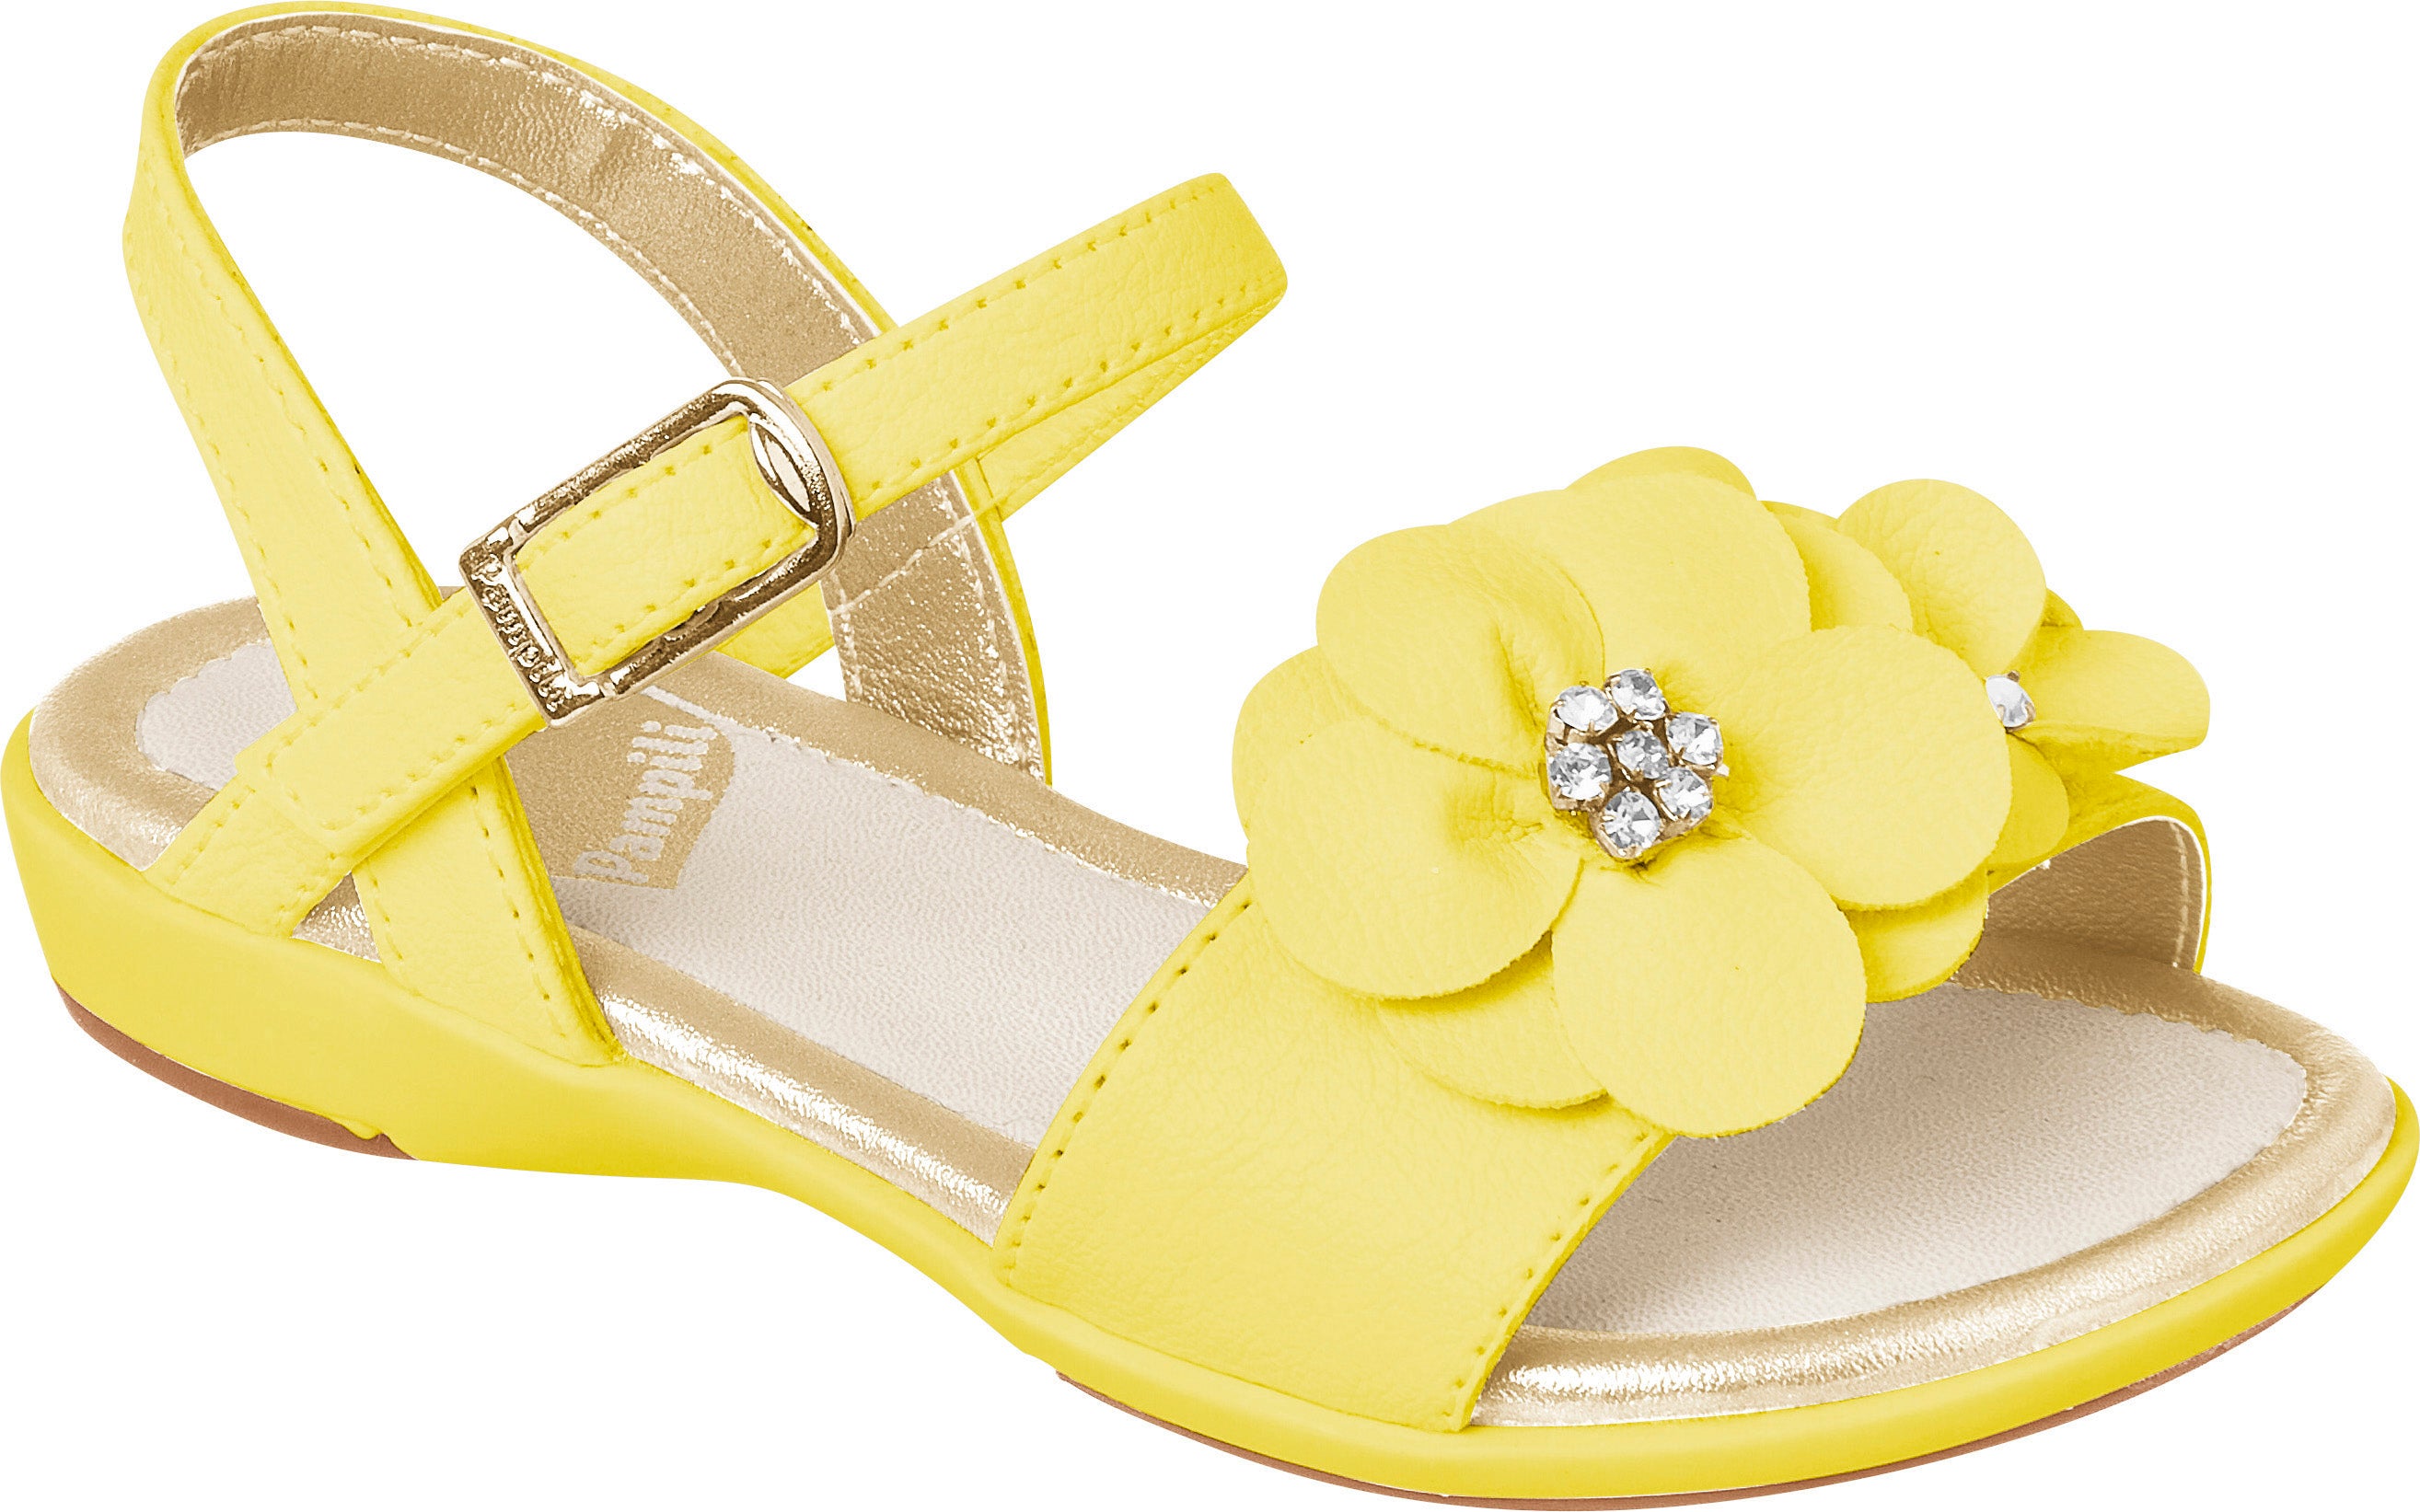 pampili yellow sandal with flowers on toe